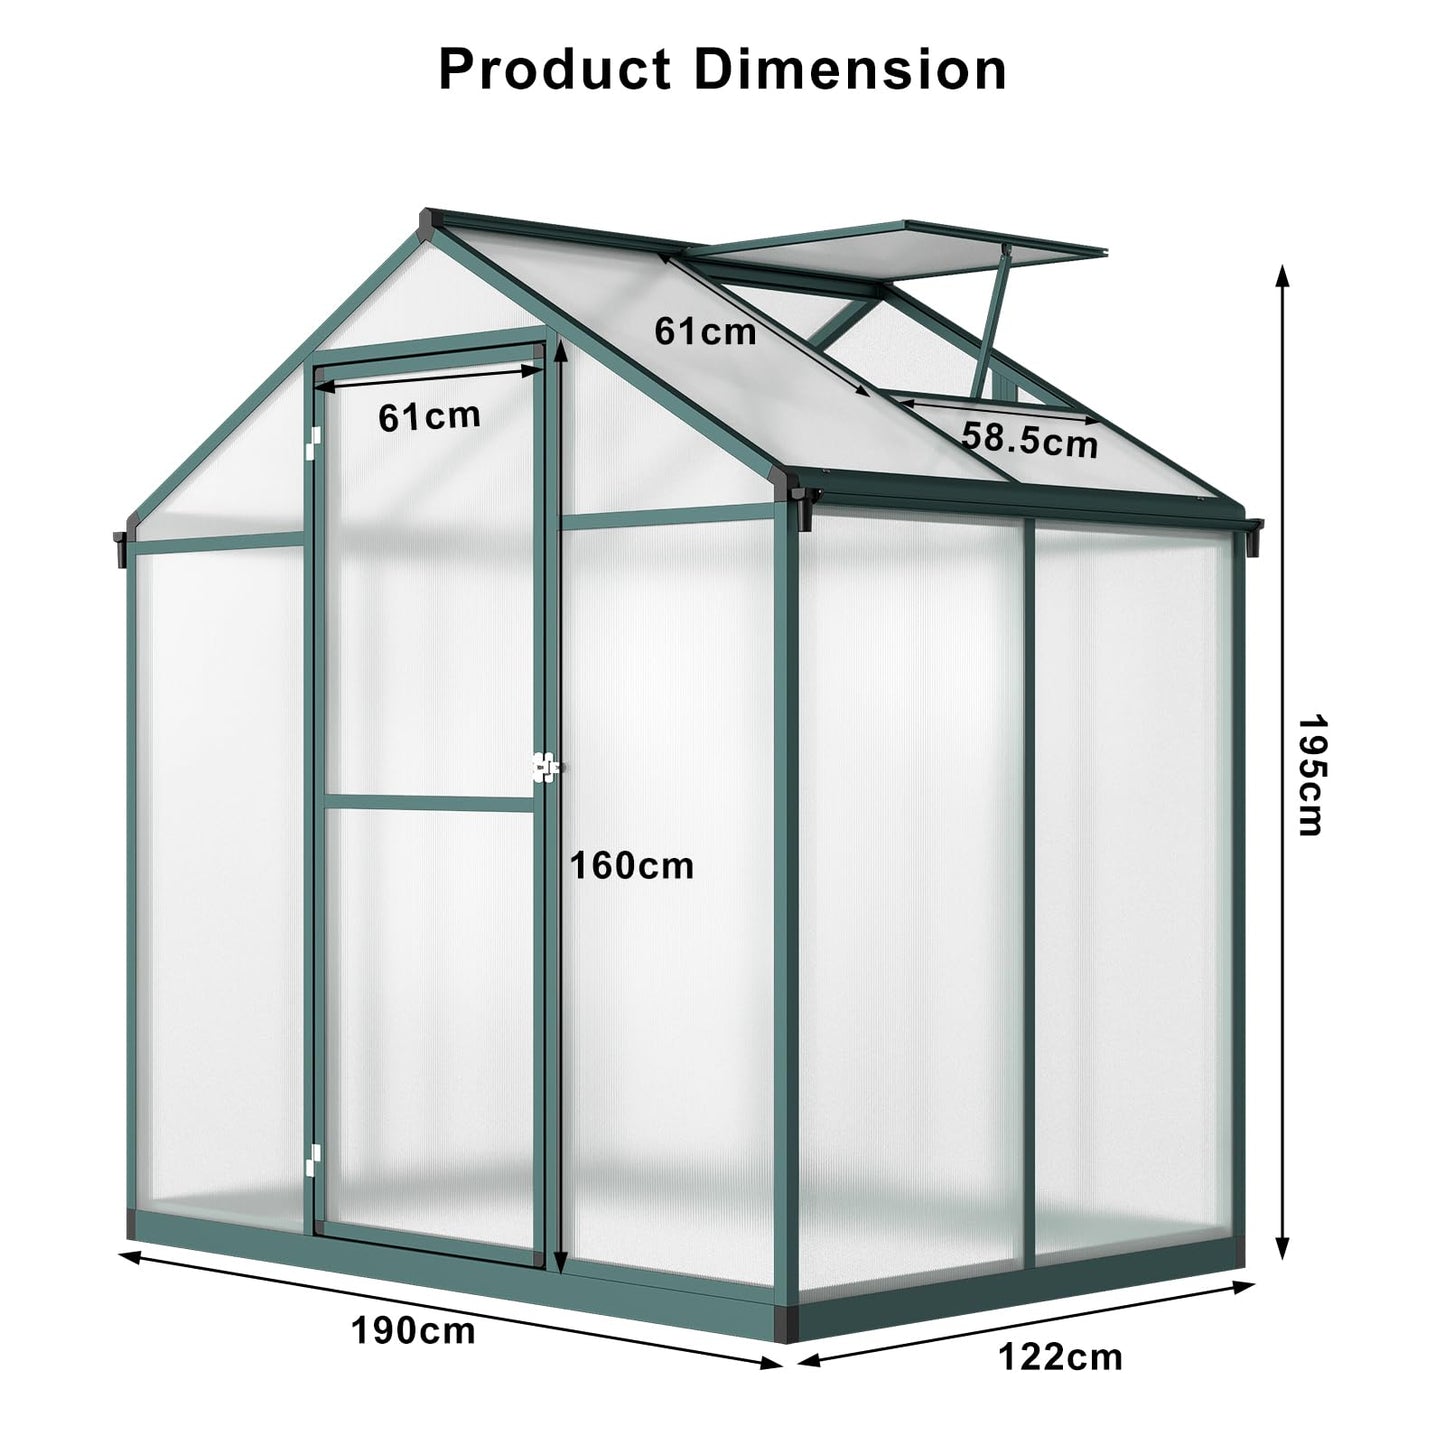 6x4 FT Greenhouse for Outdoors, Polycarbonate Greenhouse with Quick Setup Structure and Roof Vent, Aluminum Large Walk-in Greenhouse for Outside Garden Backyard, Green